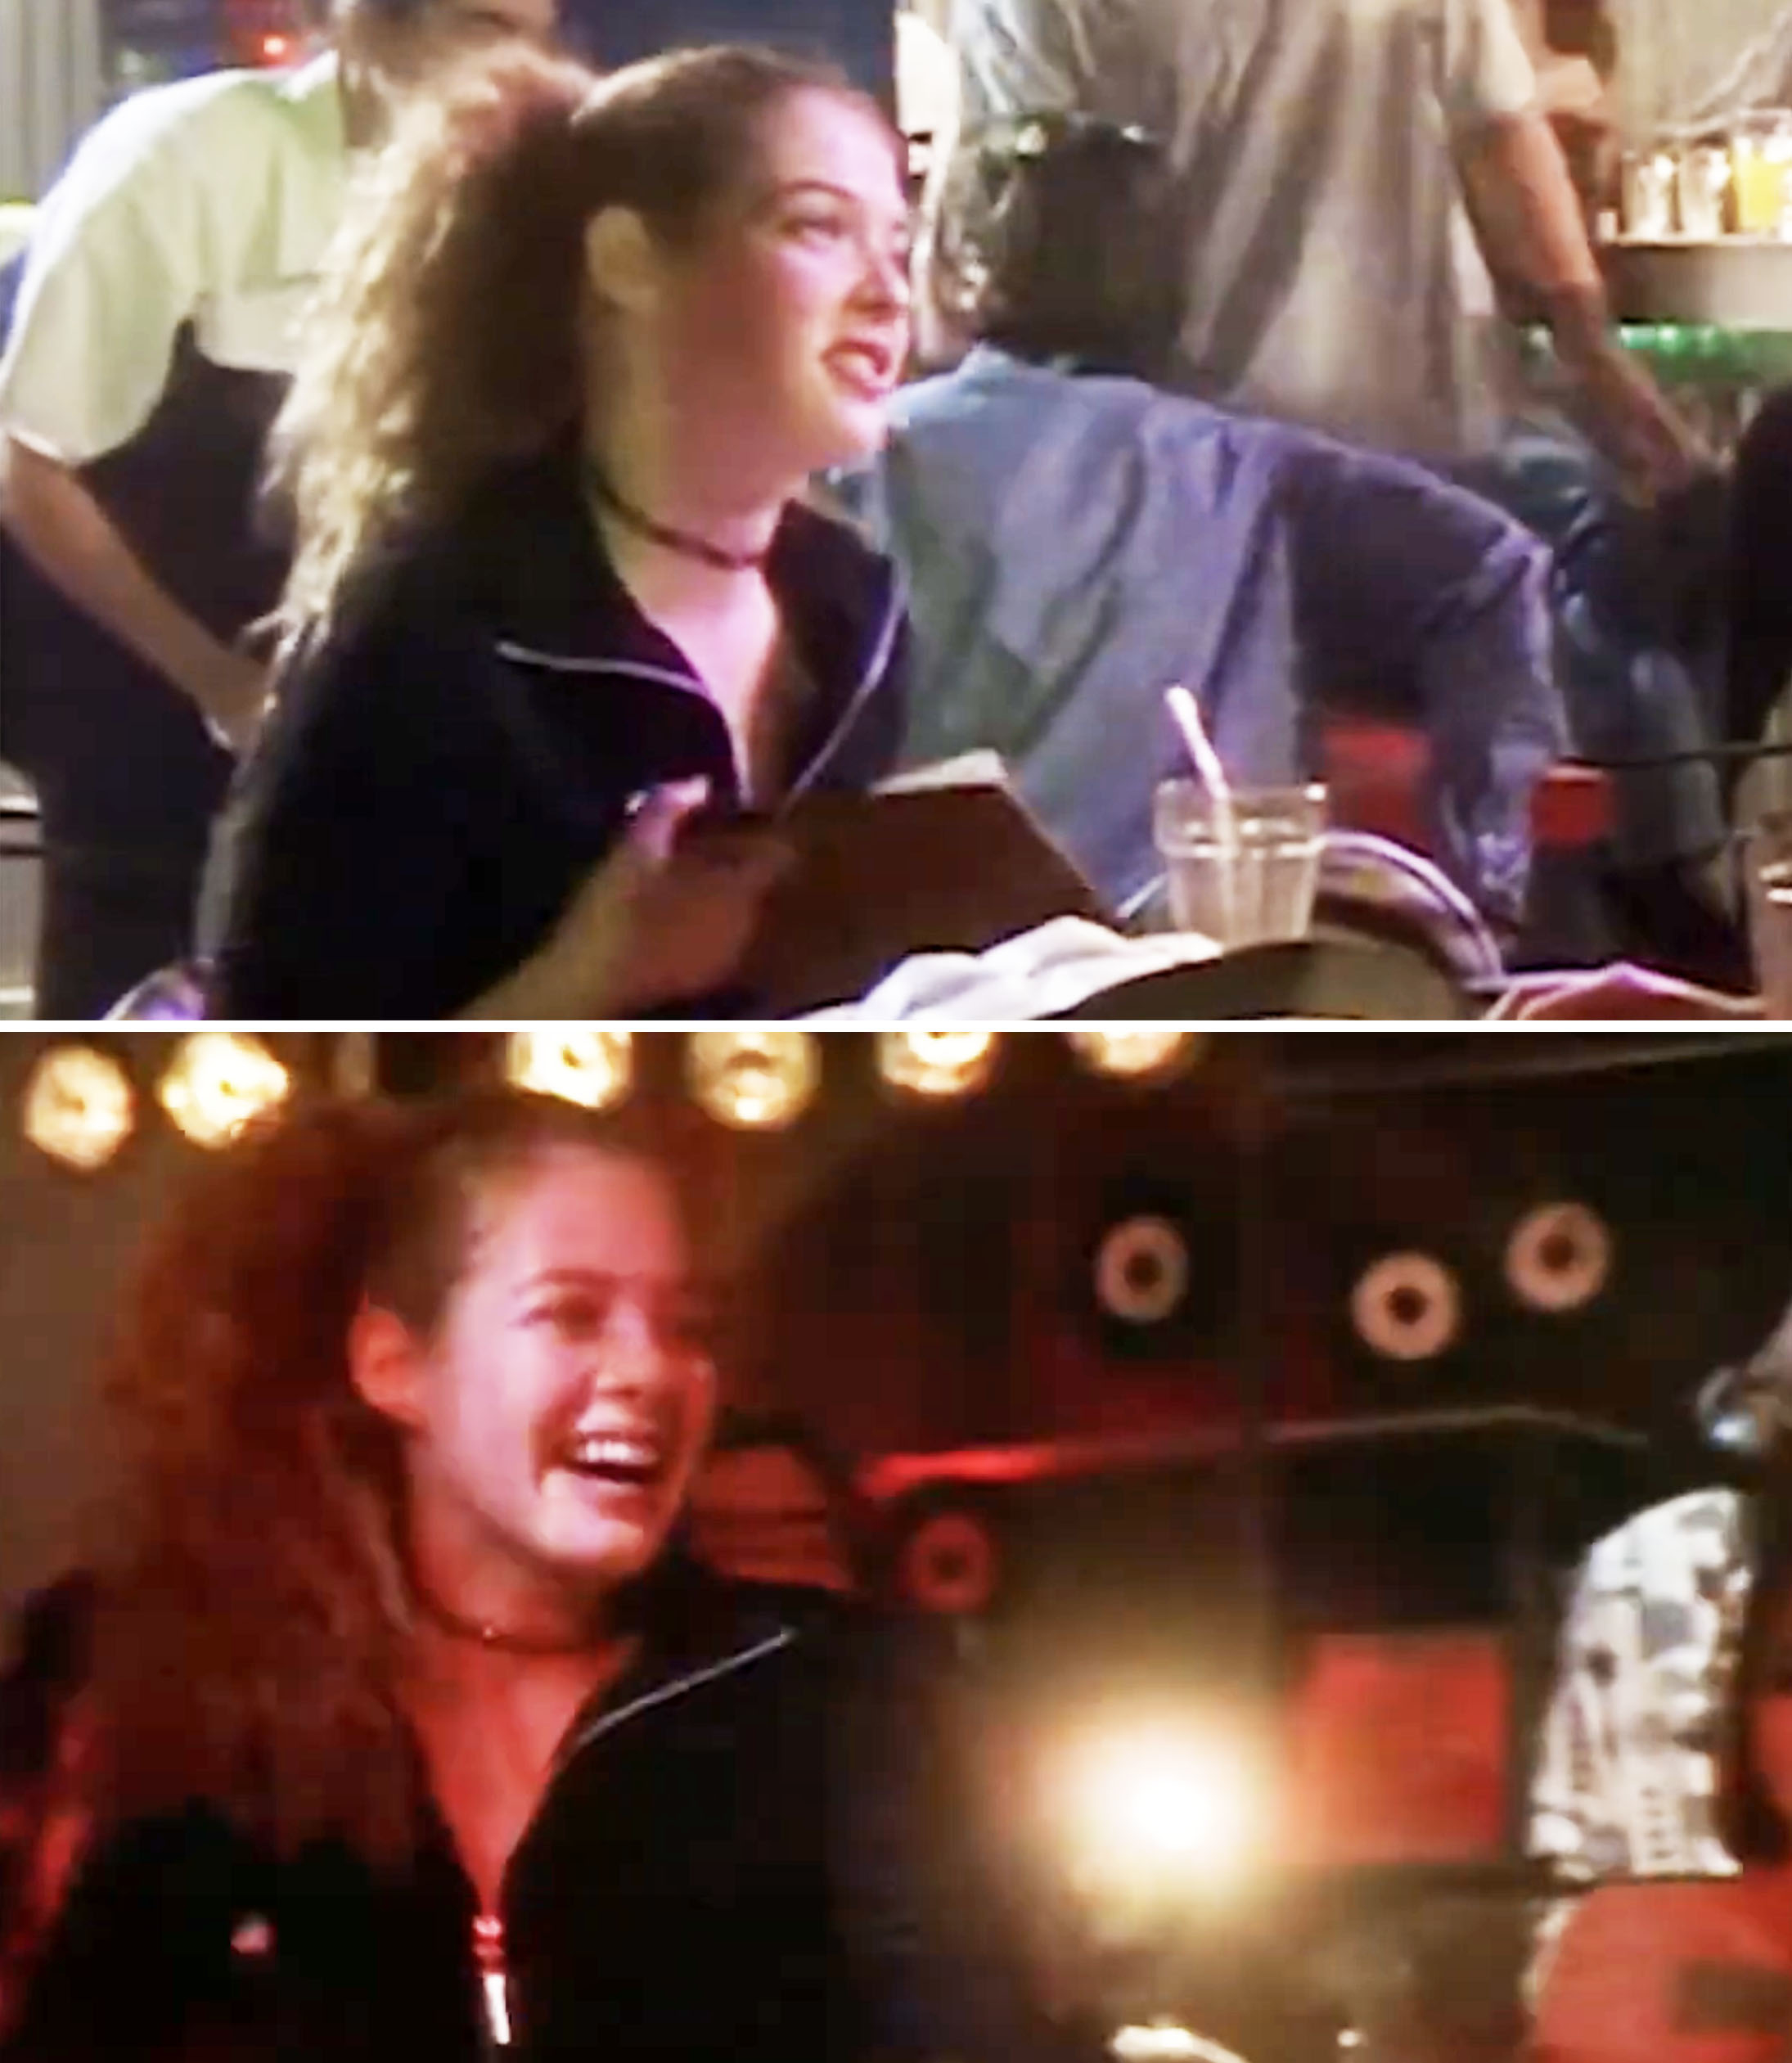 her character laughing in a diner